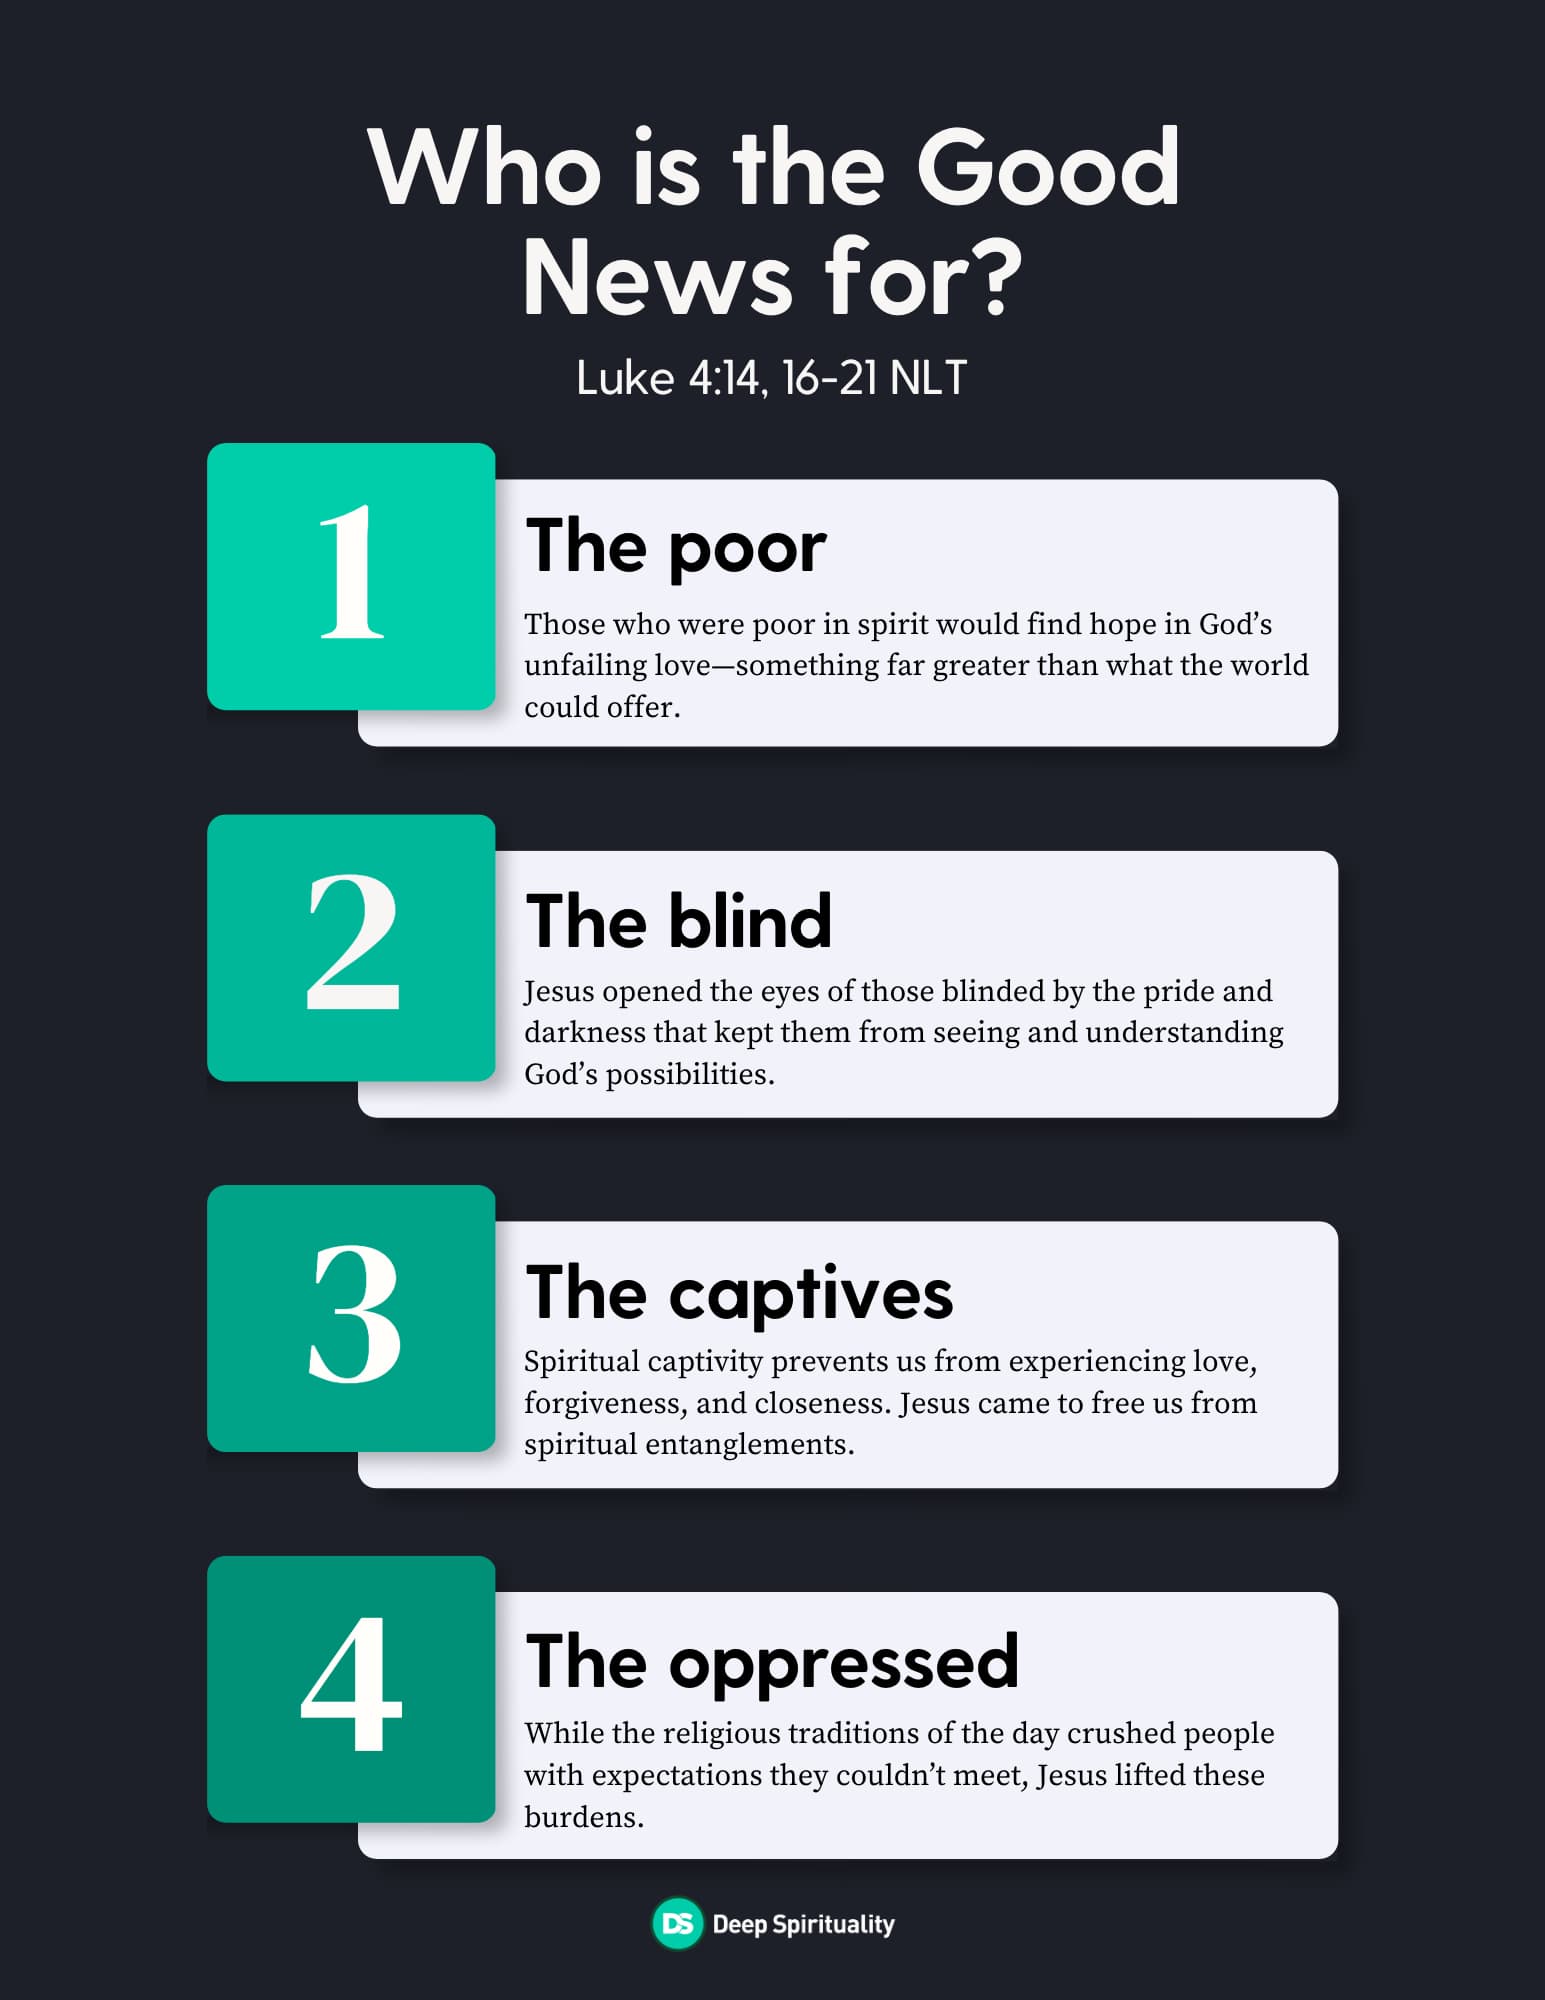 Who is the Good News for?